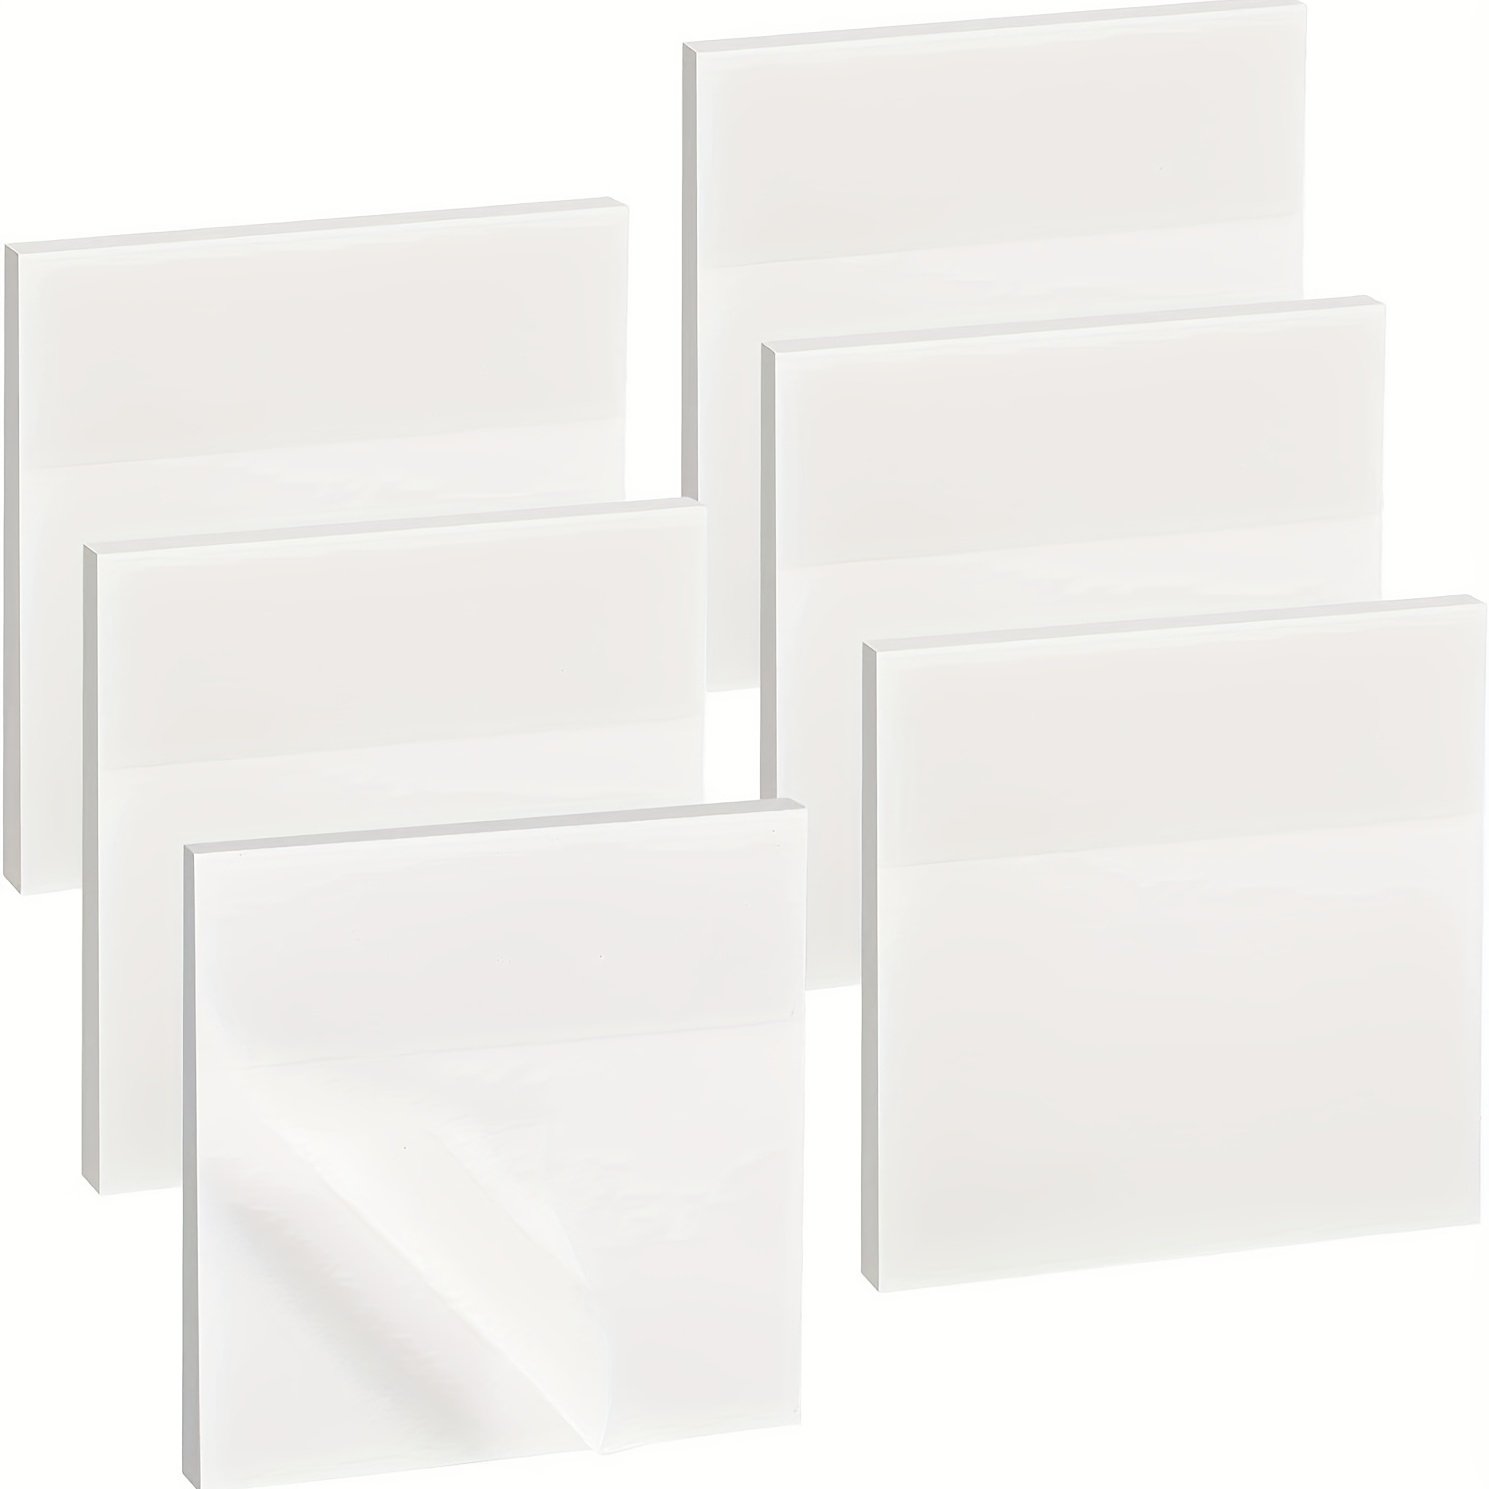  Transparent Sticky Notes, Pack of 12 Pads, Translucent Sticky  Notes Set (Clear, 3 x 3 600 Sheets) See Through for Annotating and  Tracing : Office Products